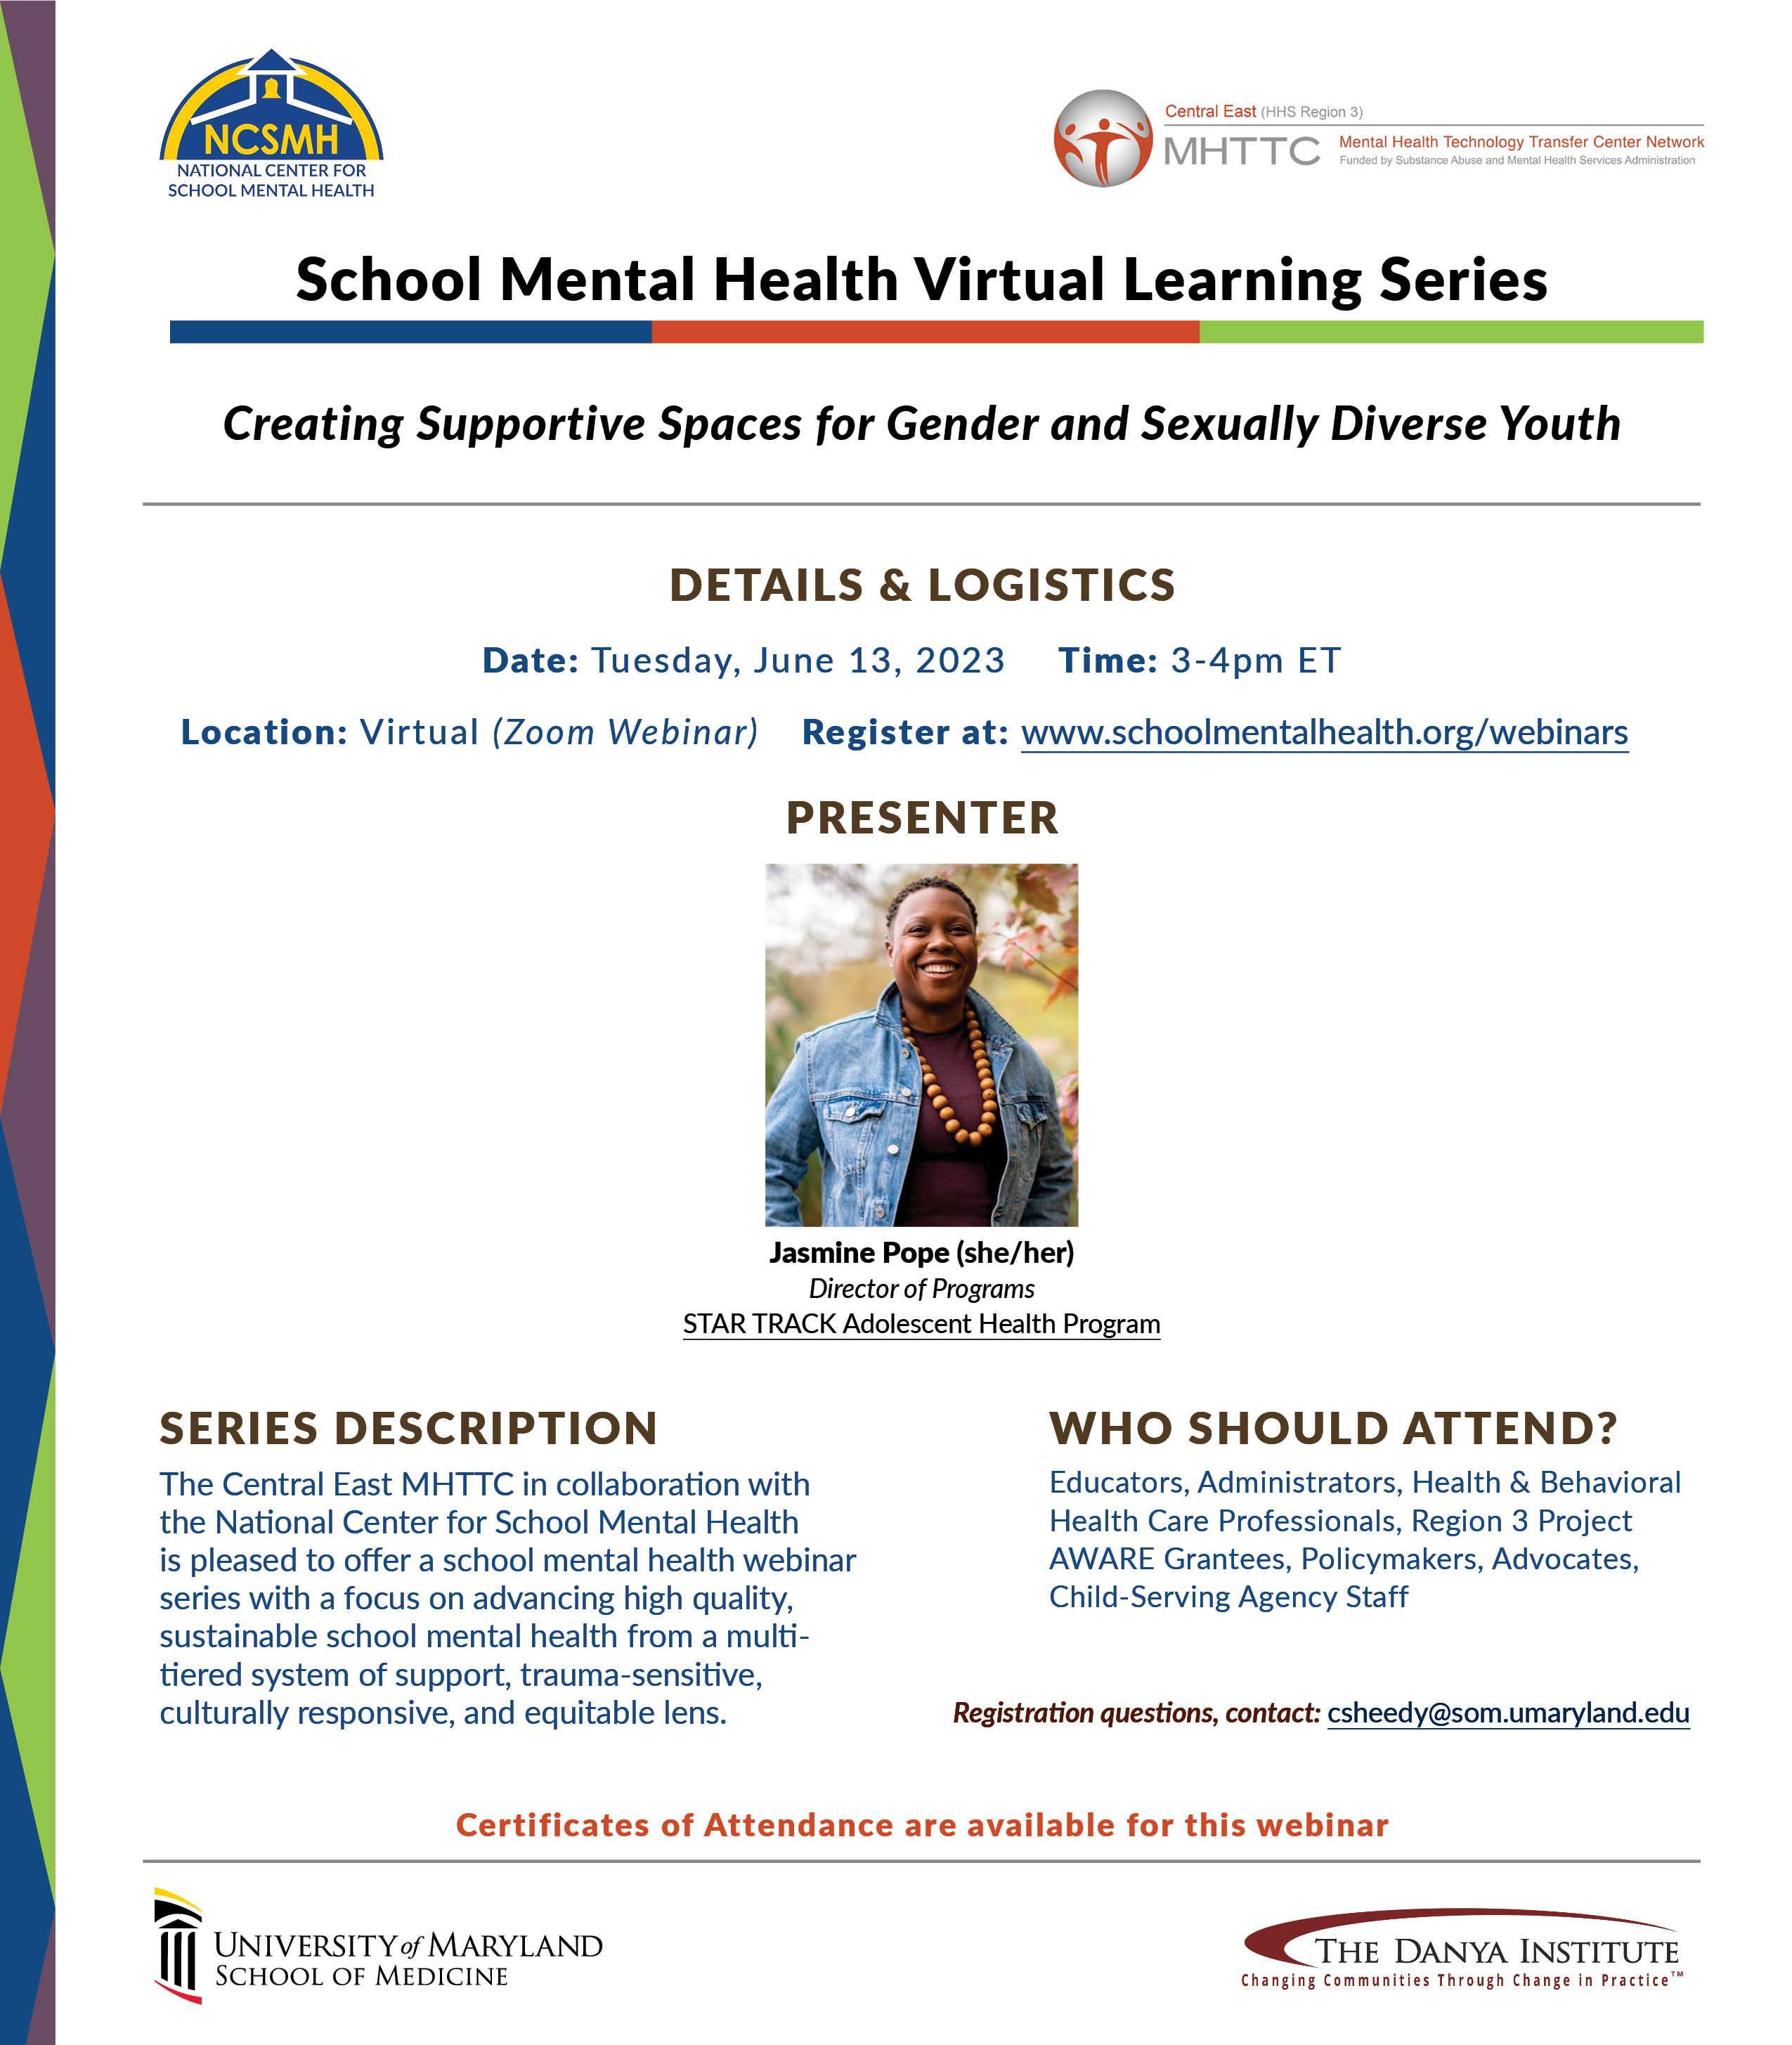 A flier for the School Mental Health Virtual Learning Series